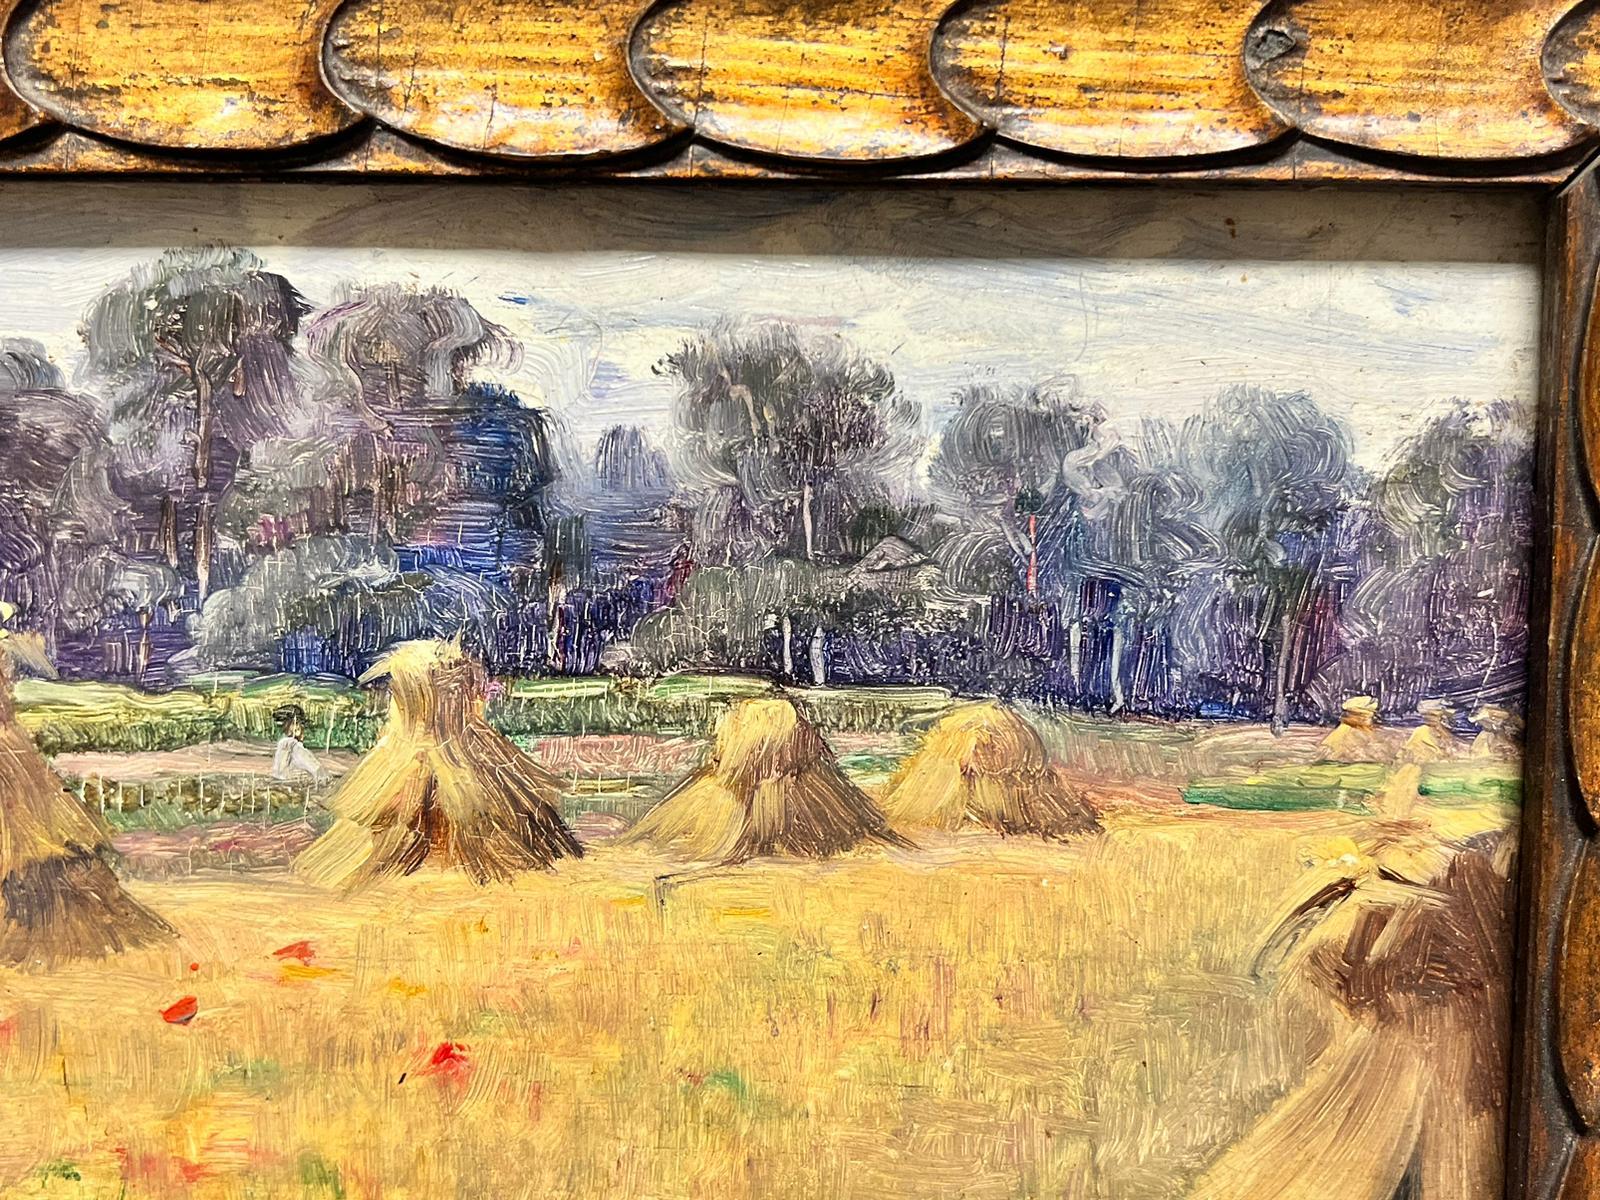 French Impressionist artist, early 1900’s
signed oil on board, framed
size: 9 x 12 inches
board: 5.5 x 9 inches
private collection, France 
The painting is in overall very good and sound condition
 